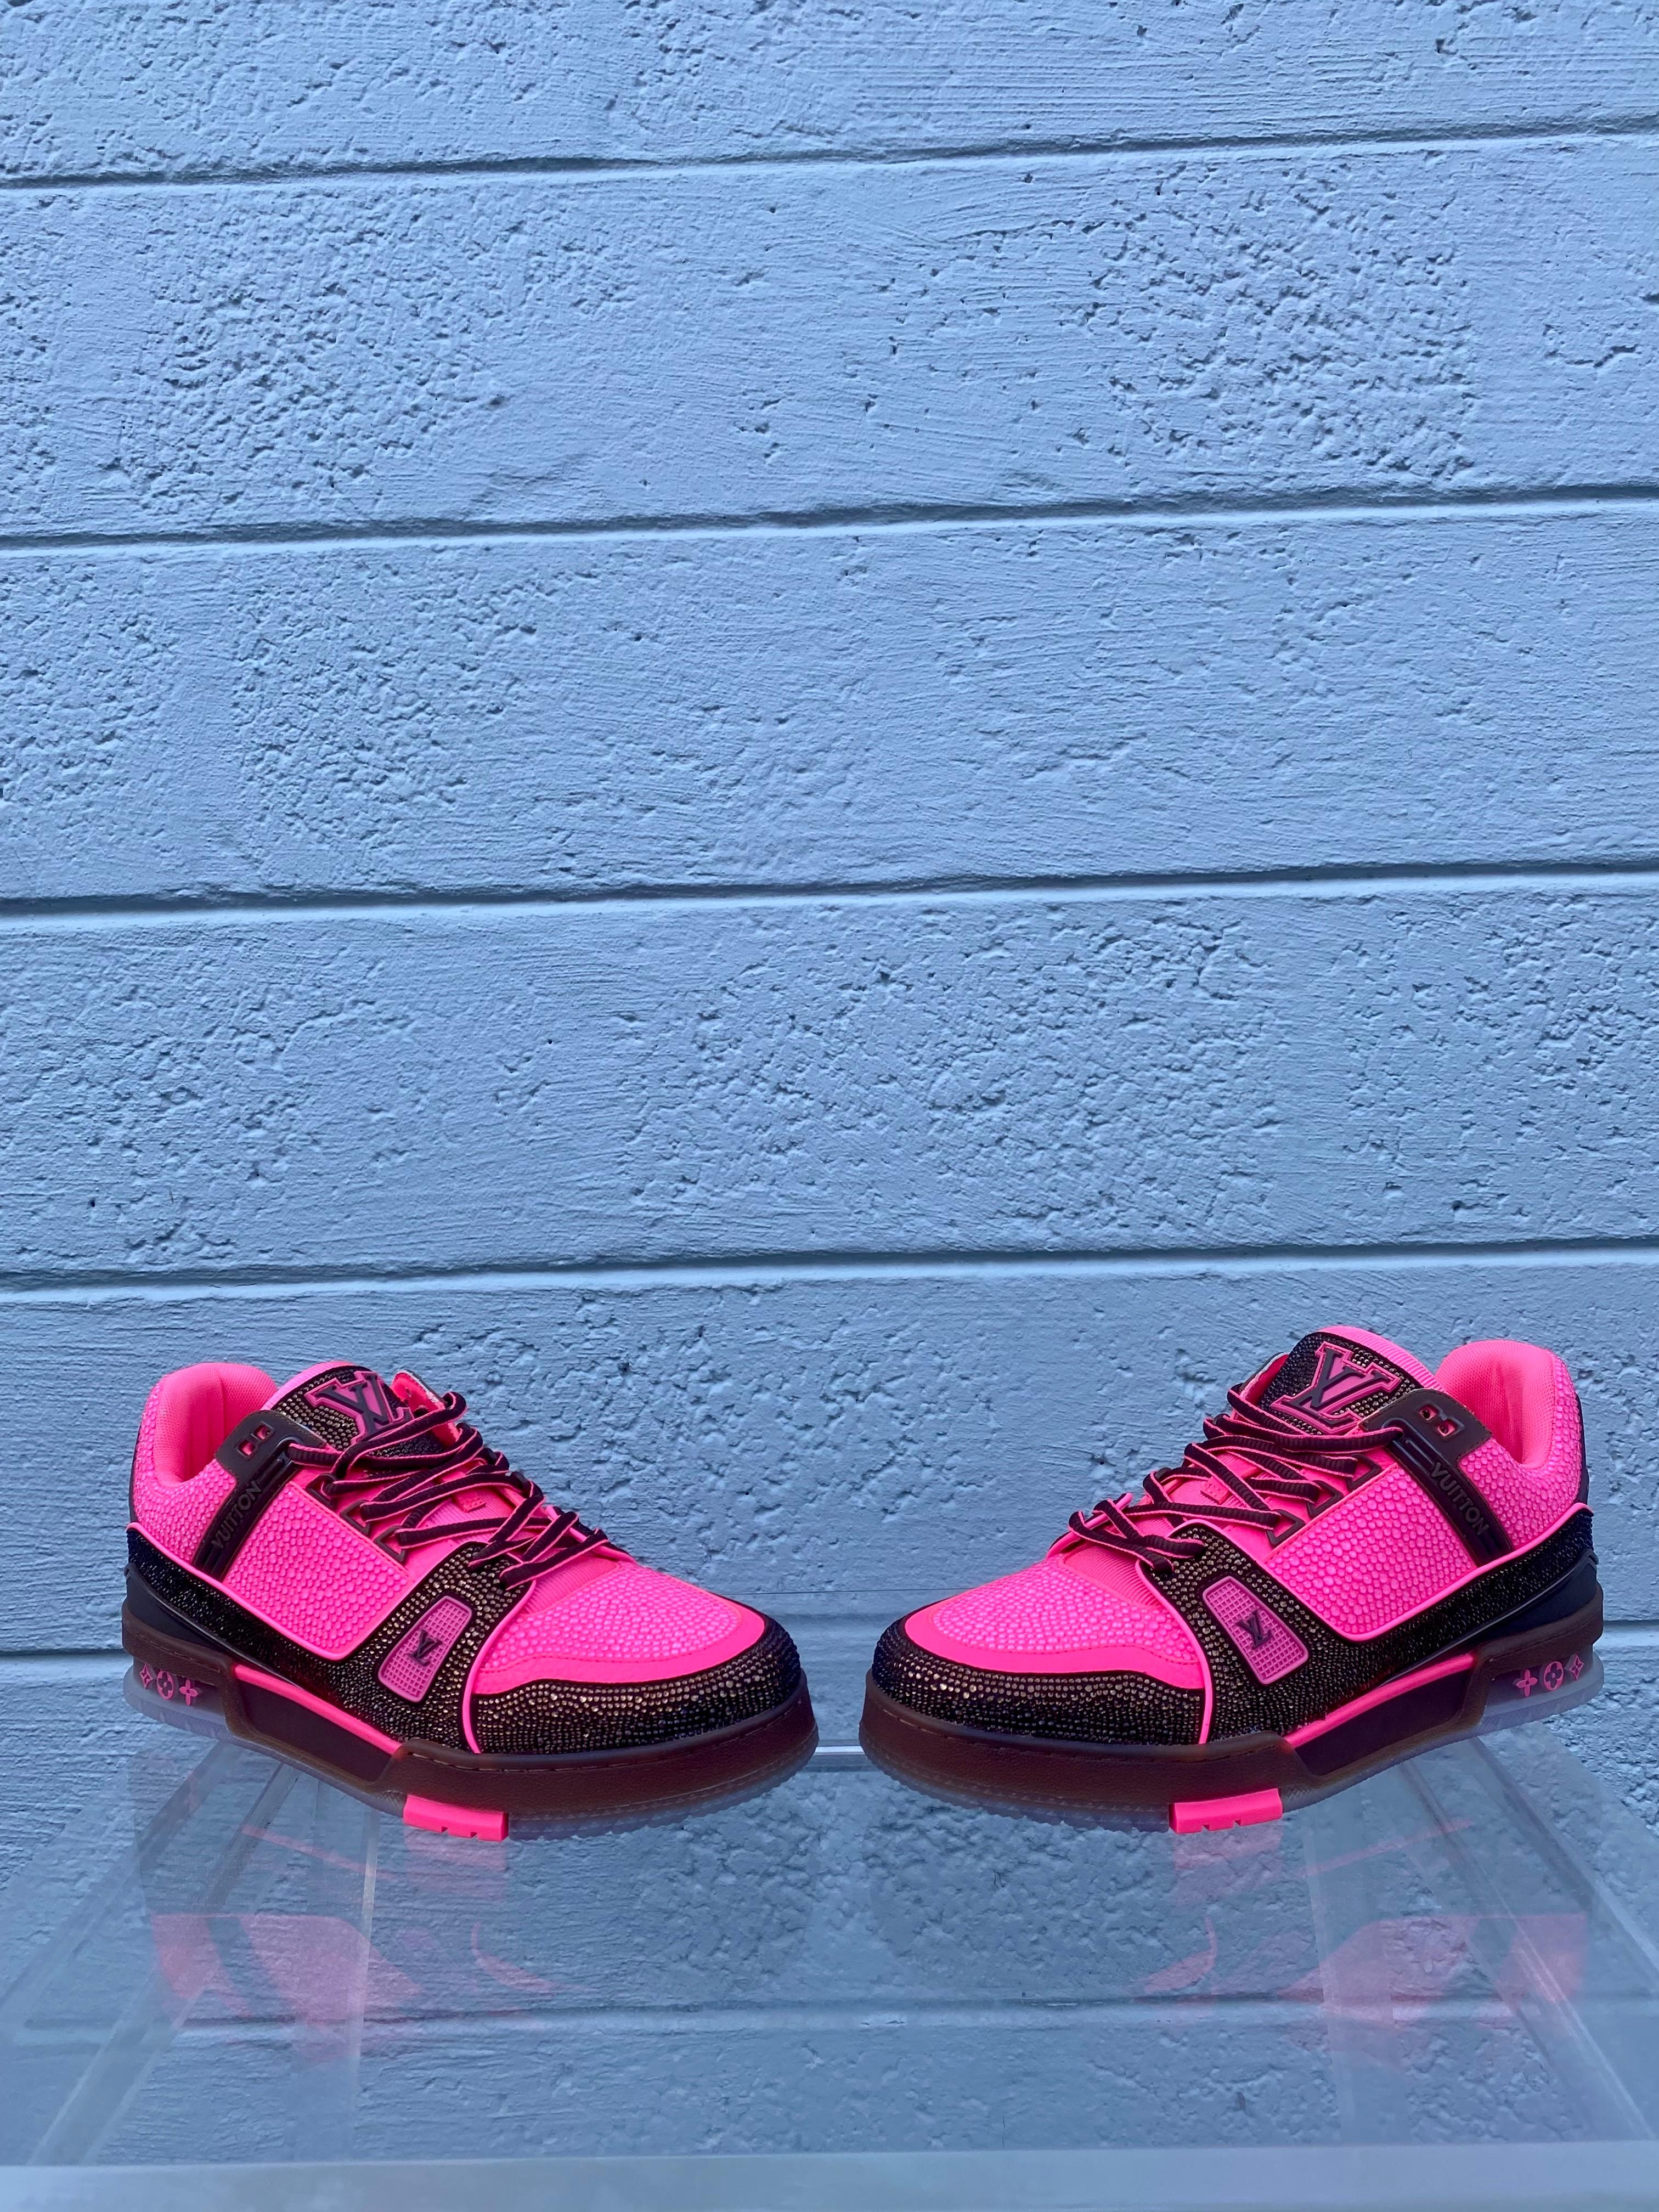 New Rare Limited Edition Louis Vuitton Pink shoes For Sale 3